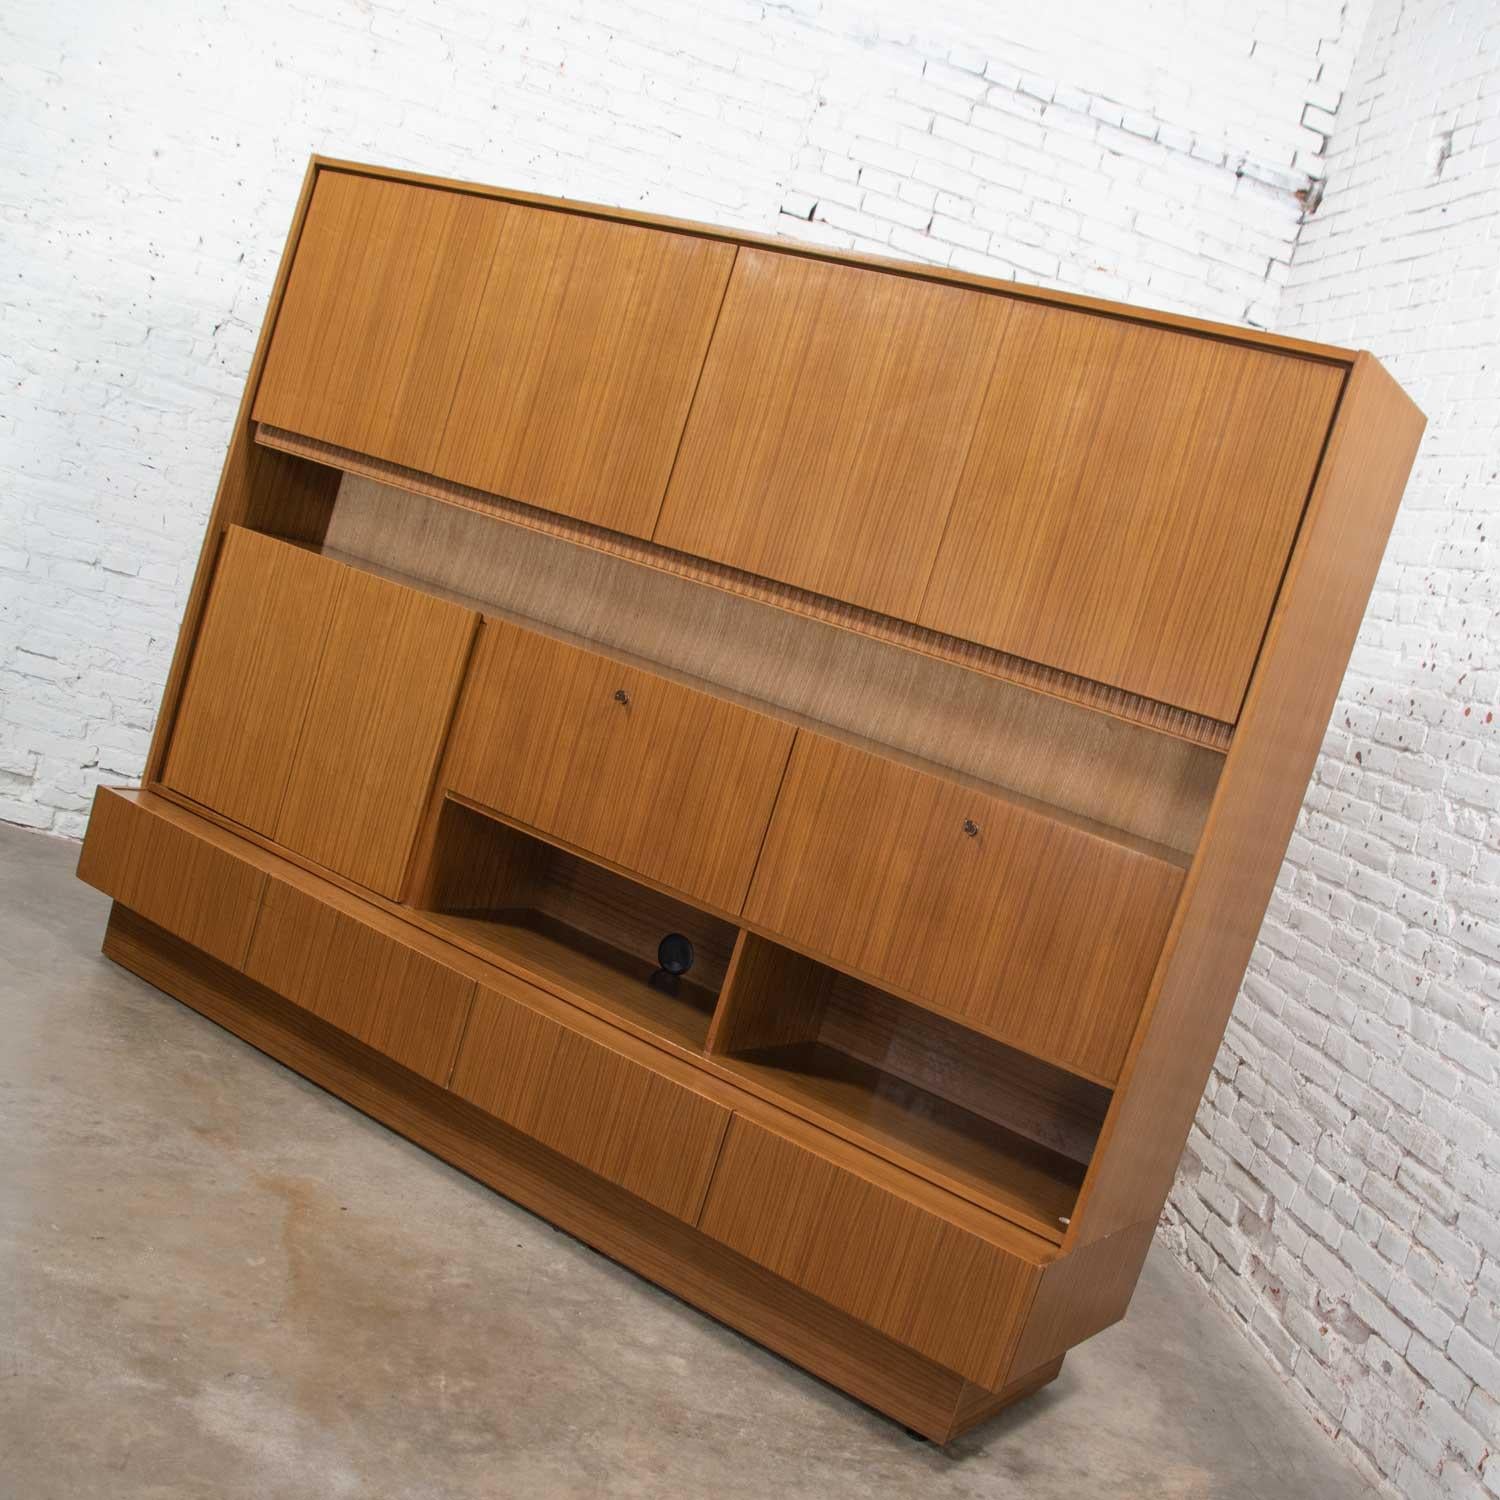 Handsome Mid-Century Modern German shrunk, wall unit, secretary, or liquor cabinet in beautiful teak veneer. This piece separates into two pieces upper and lower. It is in wonderful condition with no outstanding flaws. That is not to say it is